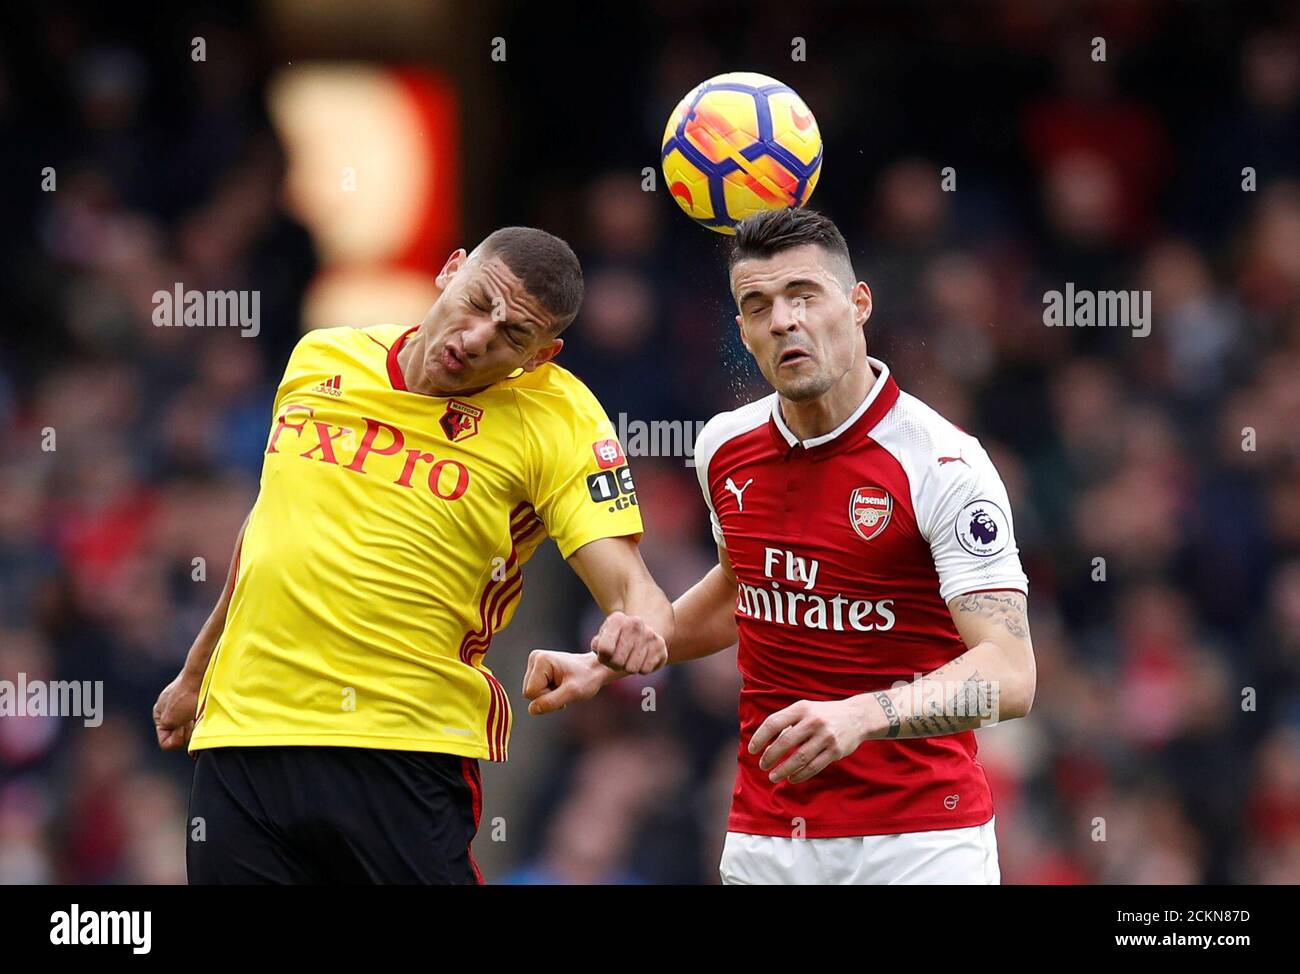 Soccer Football - Premier League - Arsenal vs Watford - Emirates Stadium, London, Britain - March 11, 2018   Watford's Richarlison in action with Arsenal's Granit Xhaka              REUTERS/Eddie Keogh    EDITORIAL USE ONLY. No use with unauthorized audio, video, data, fixture lists, club/league logos or "live" services. Online in-match use limited to 75 images, no video emulation. No use in betting, games or single club/league/player publications.  Please contact your account representative for further details. Stock Photo